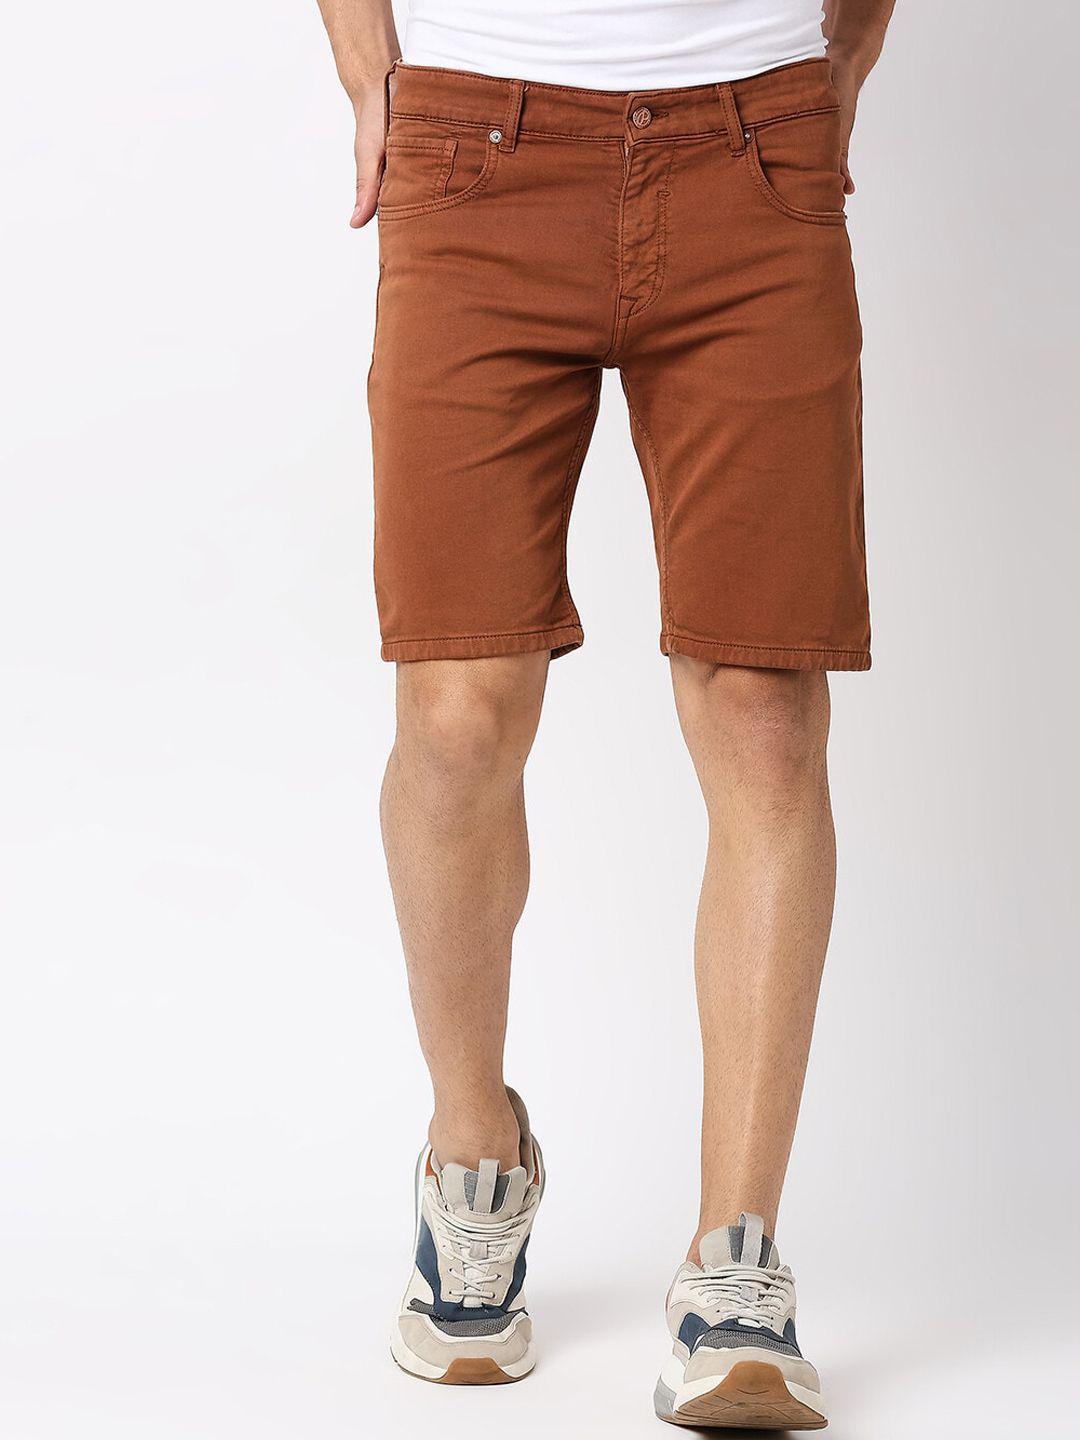 pepe-jeans-men-solid-skinny-fit-cotton-shorts